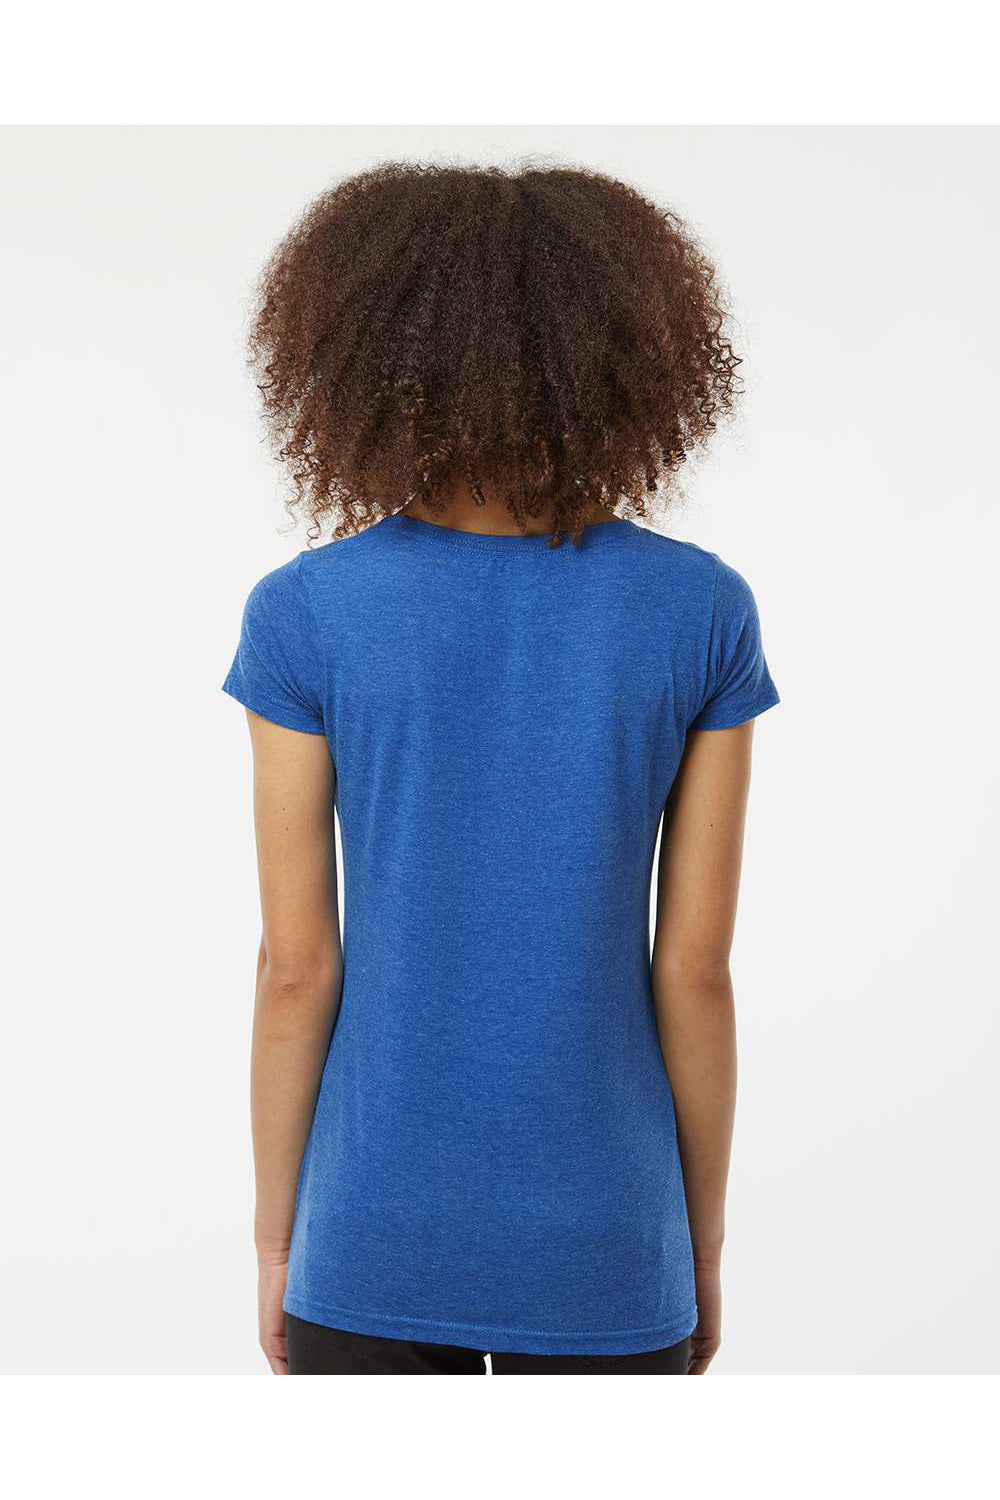 Tultex 243 Womens Poly-Rich Short Sleeve Scoop Neck T-Shirt Heather Royal Blue Model Back